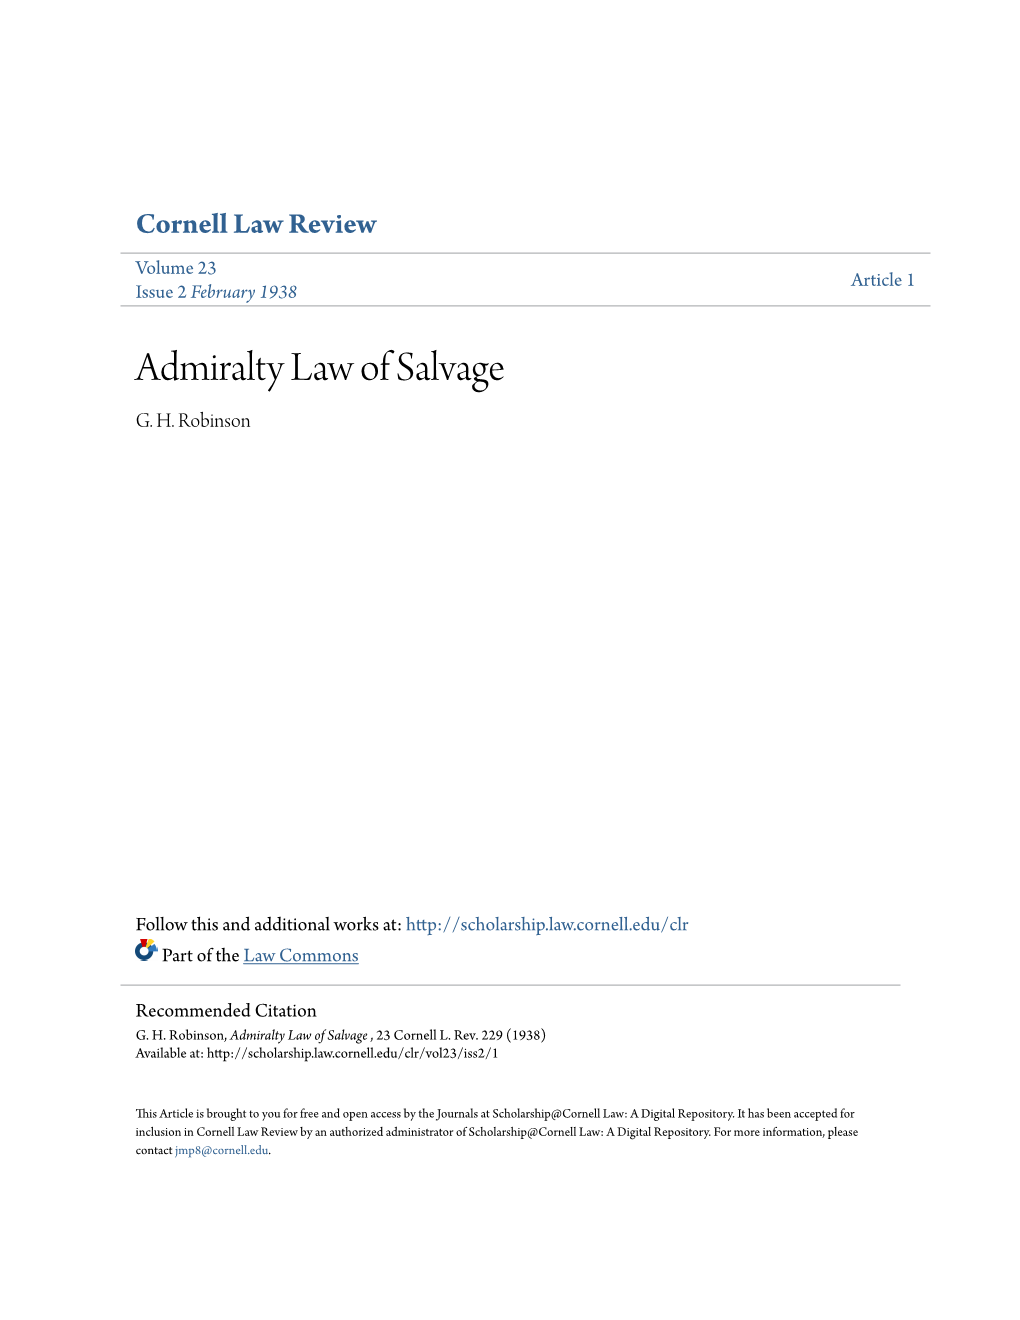 Admiralty Law of Salvage G